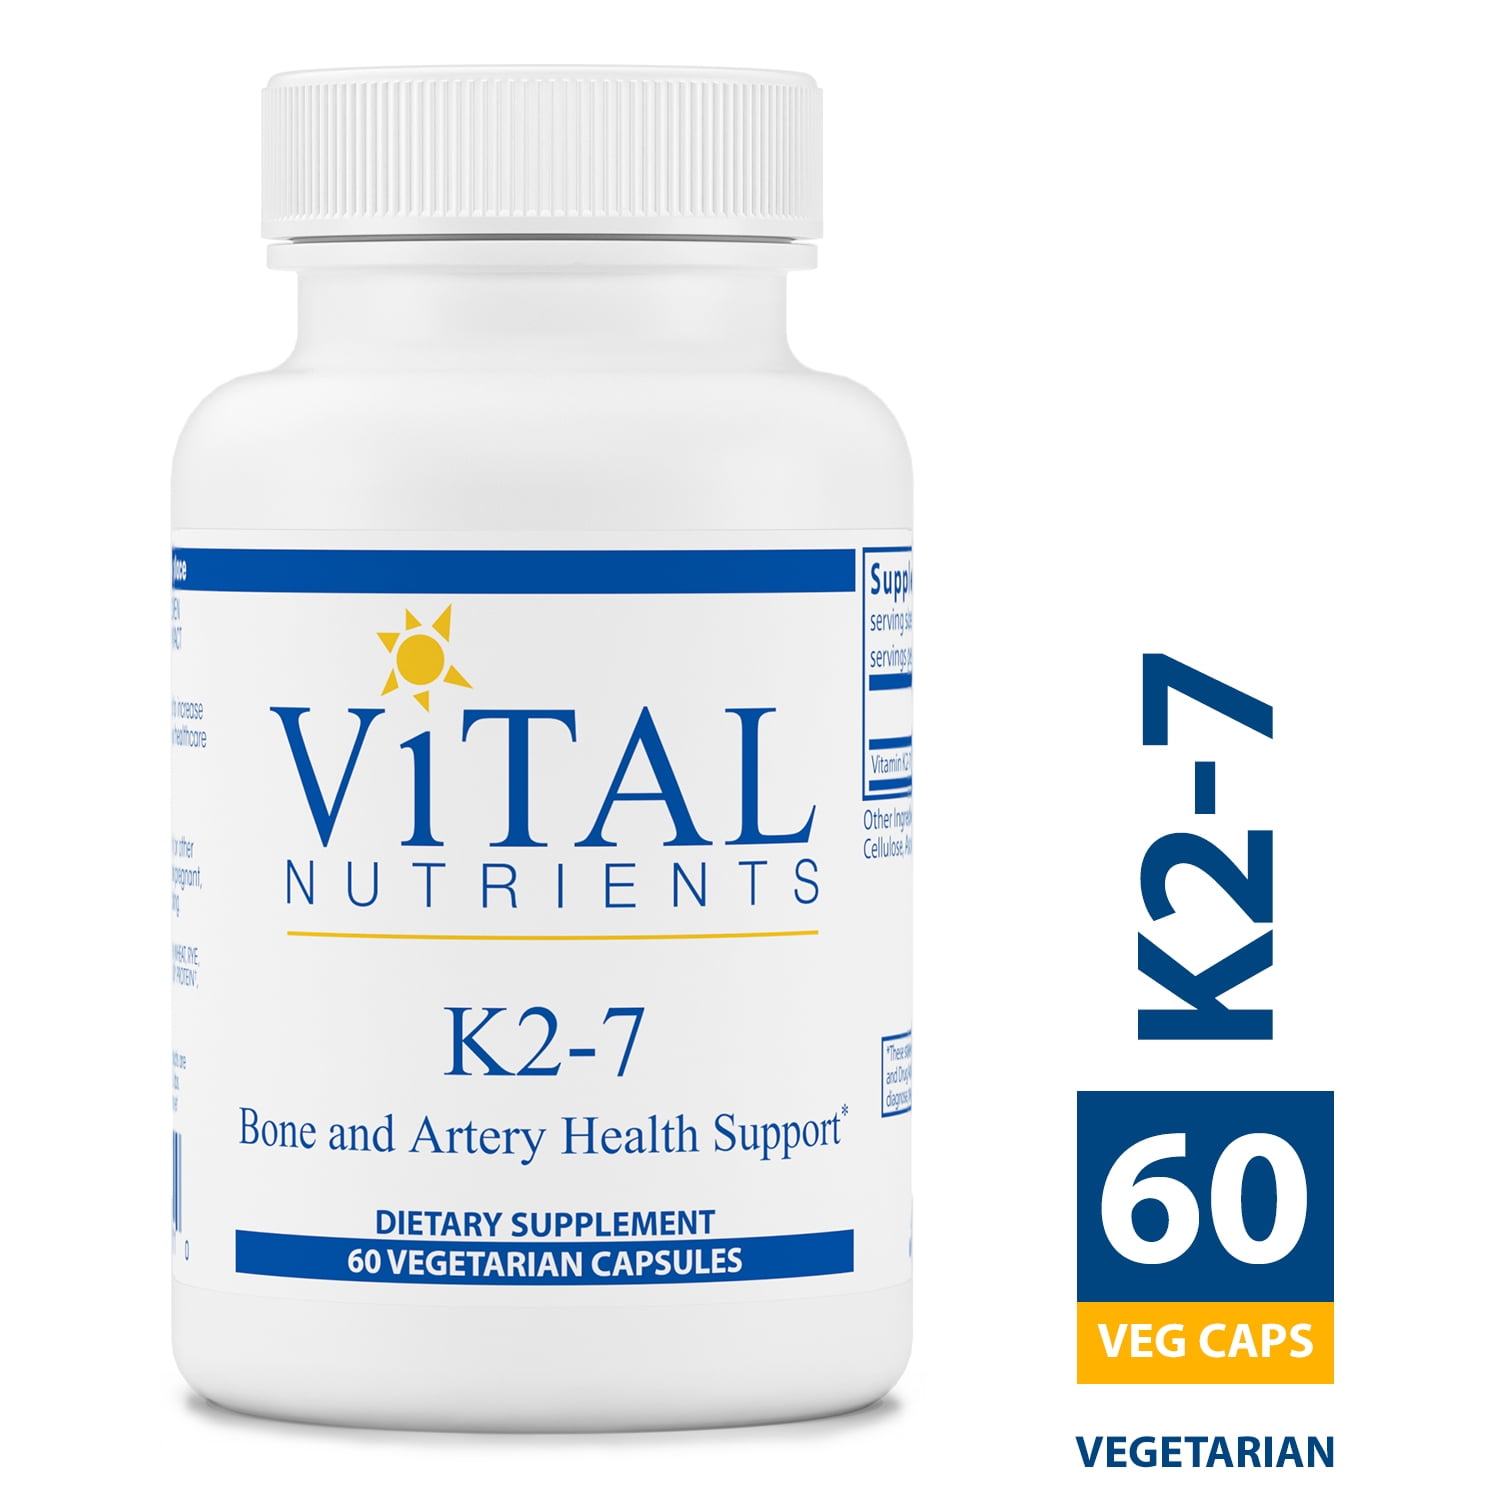 Vital Nutrients - K2-7 - Bone Strength and Artery Health Support - Promotes Cardiovascular Health - 60 Capsules per Bottle